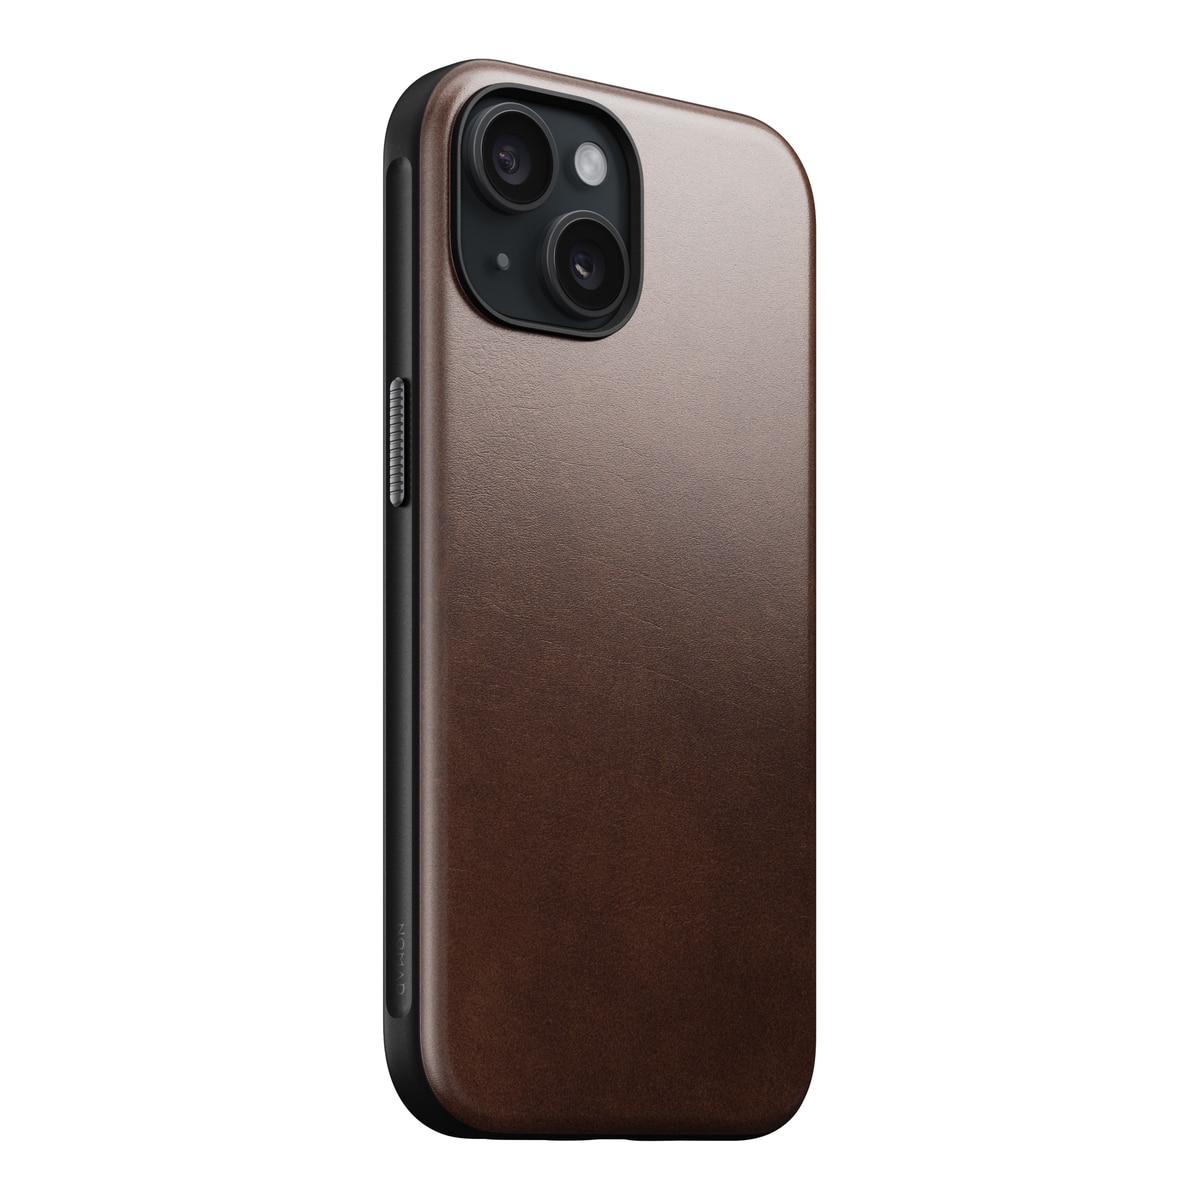 Cover Modern Case Horween Leather MagSafe iPhone 15 Rustic Brown